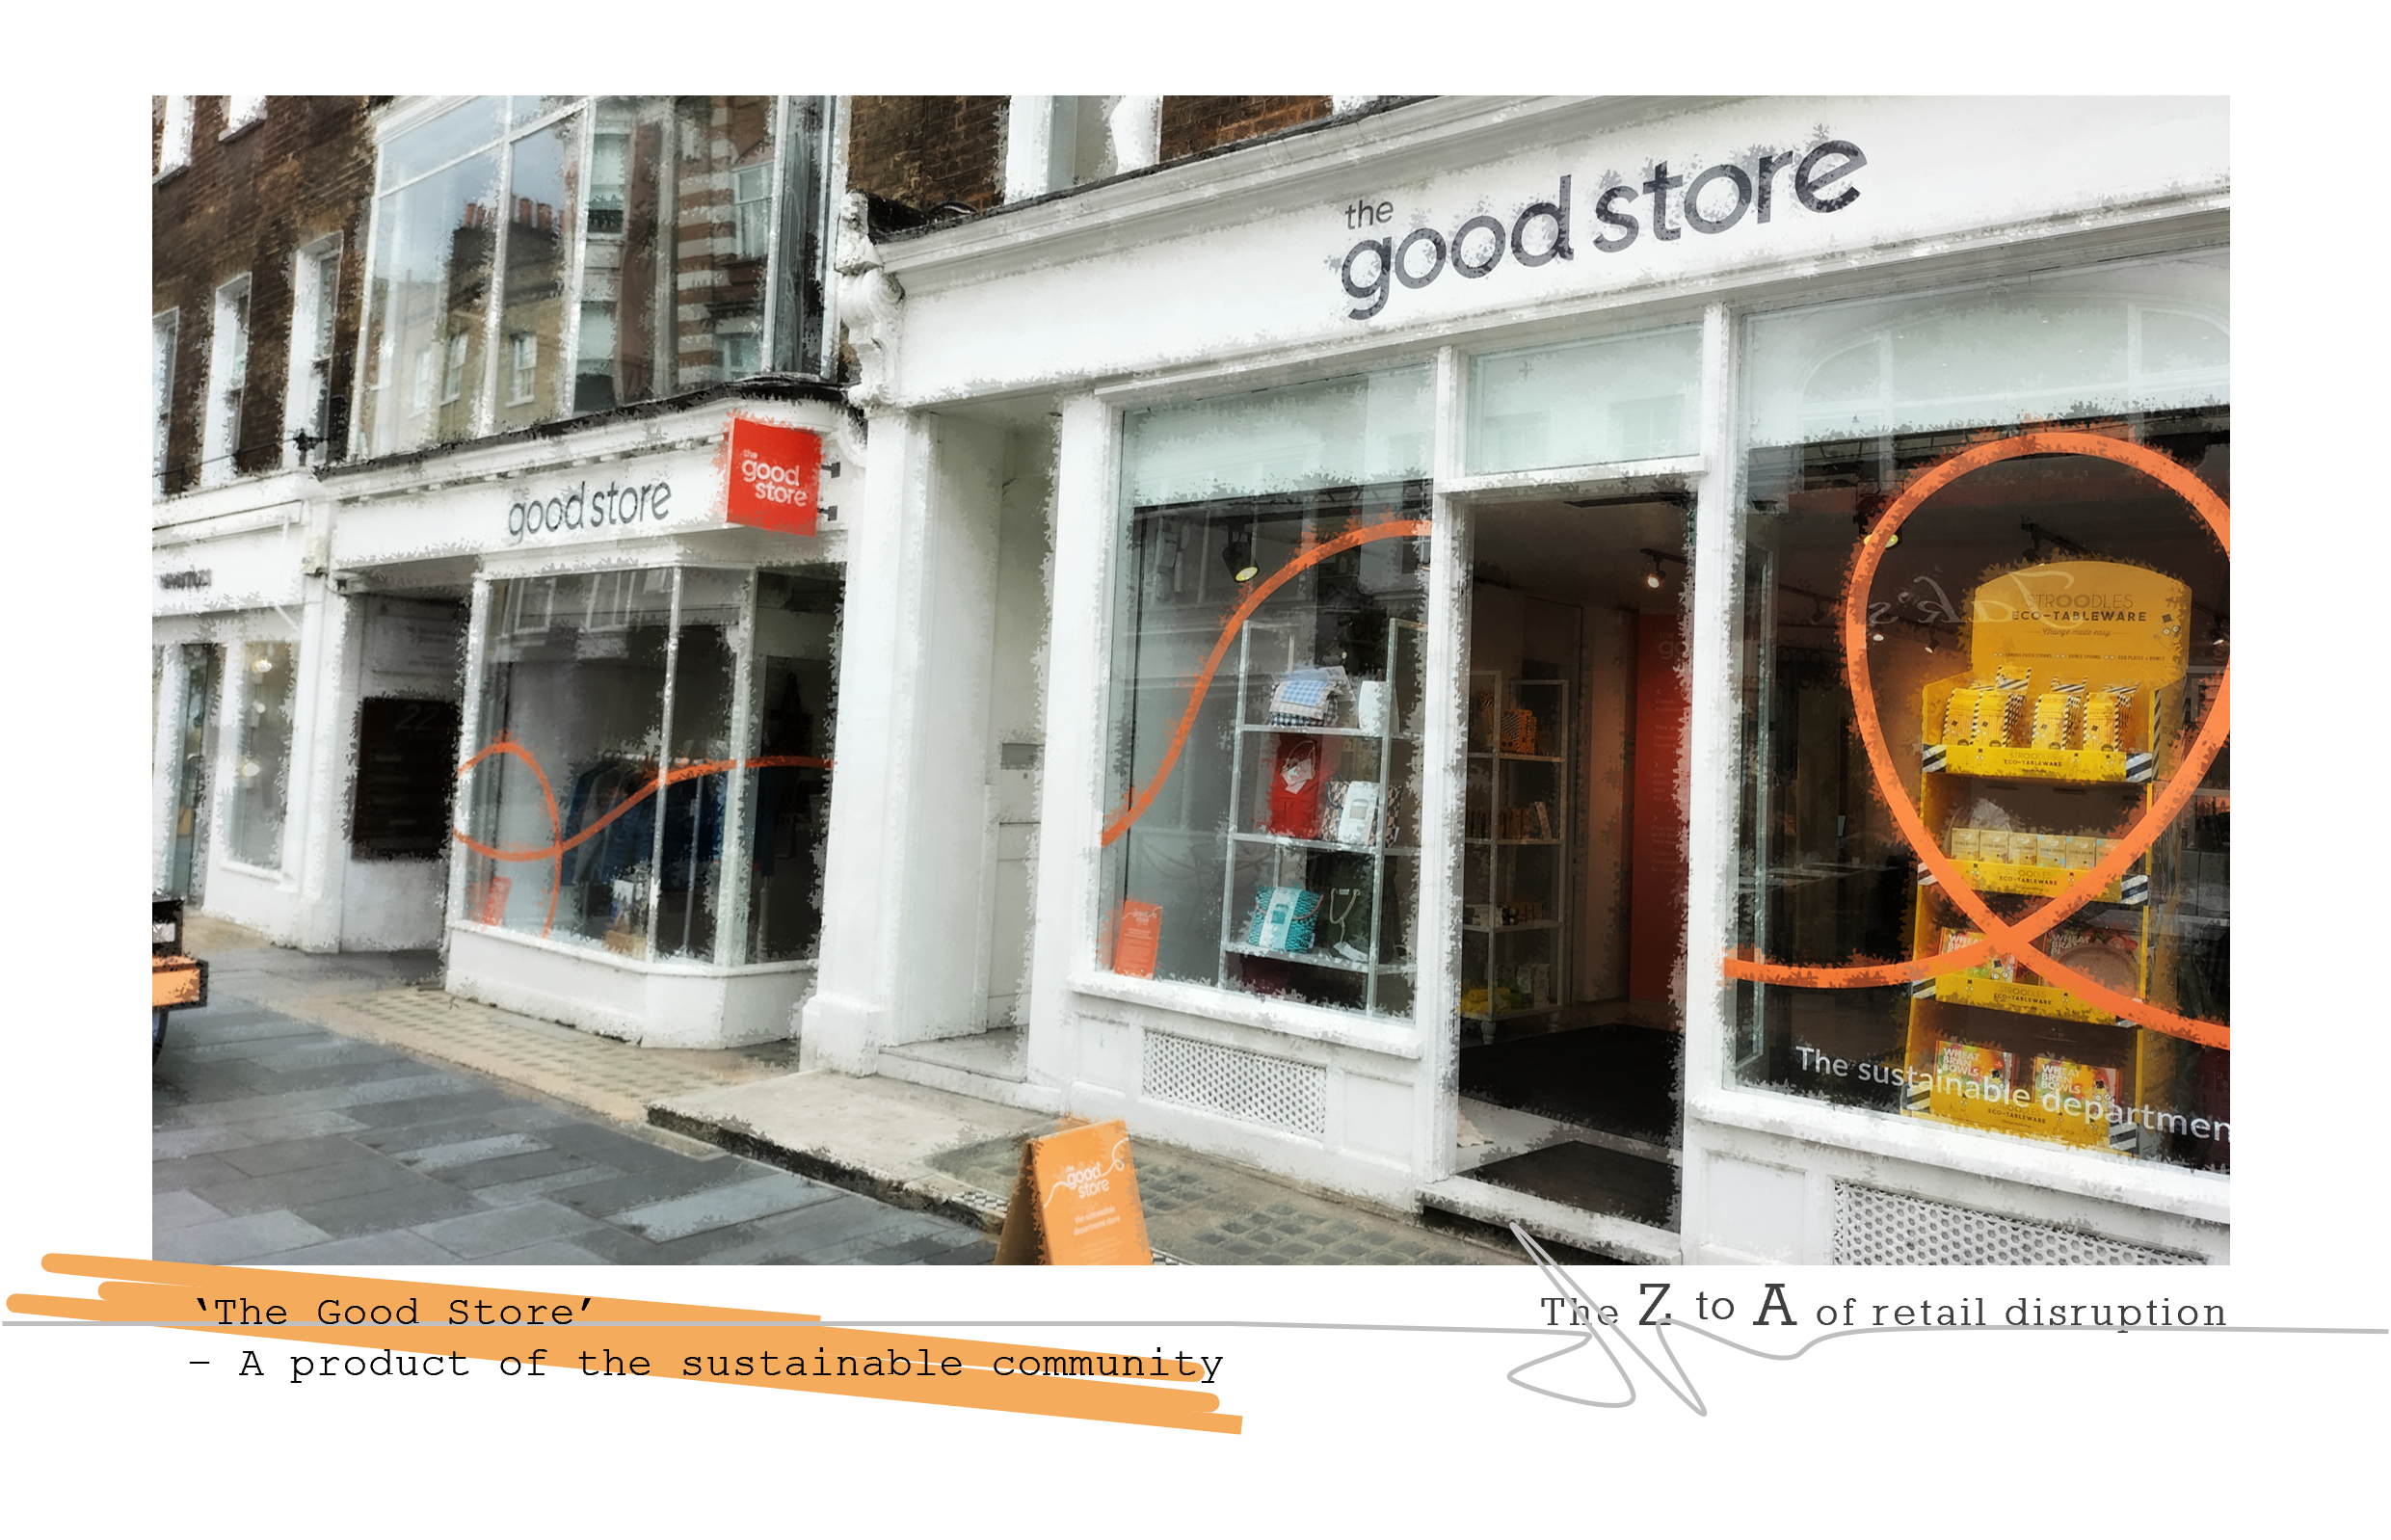 ‘The Good Store’ – A product of the sustainable community